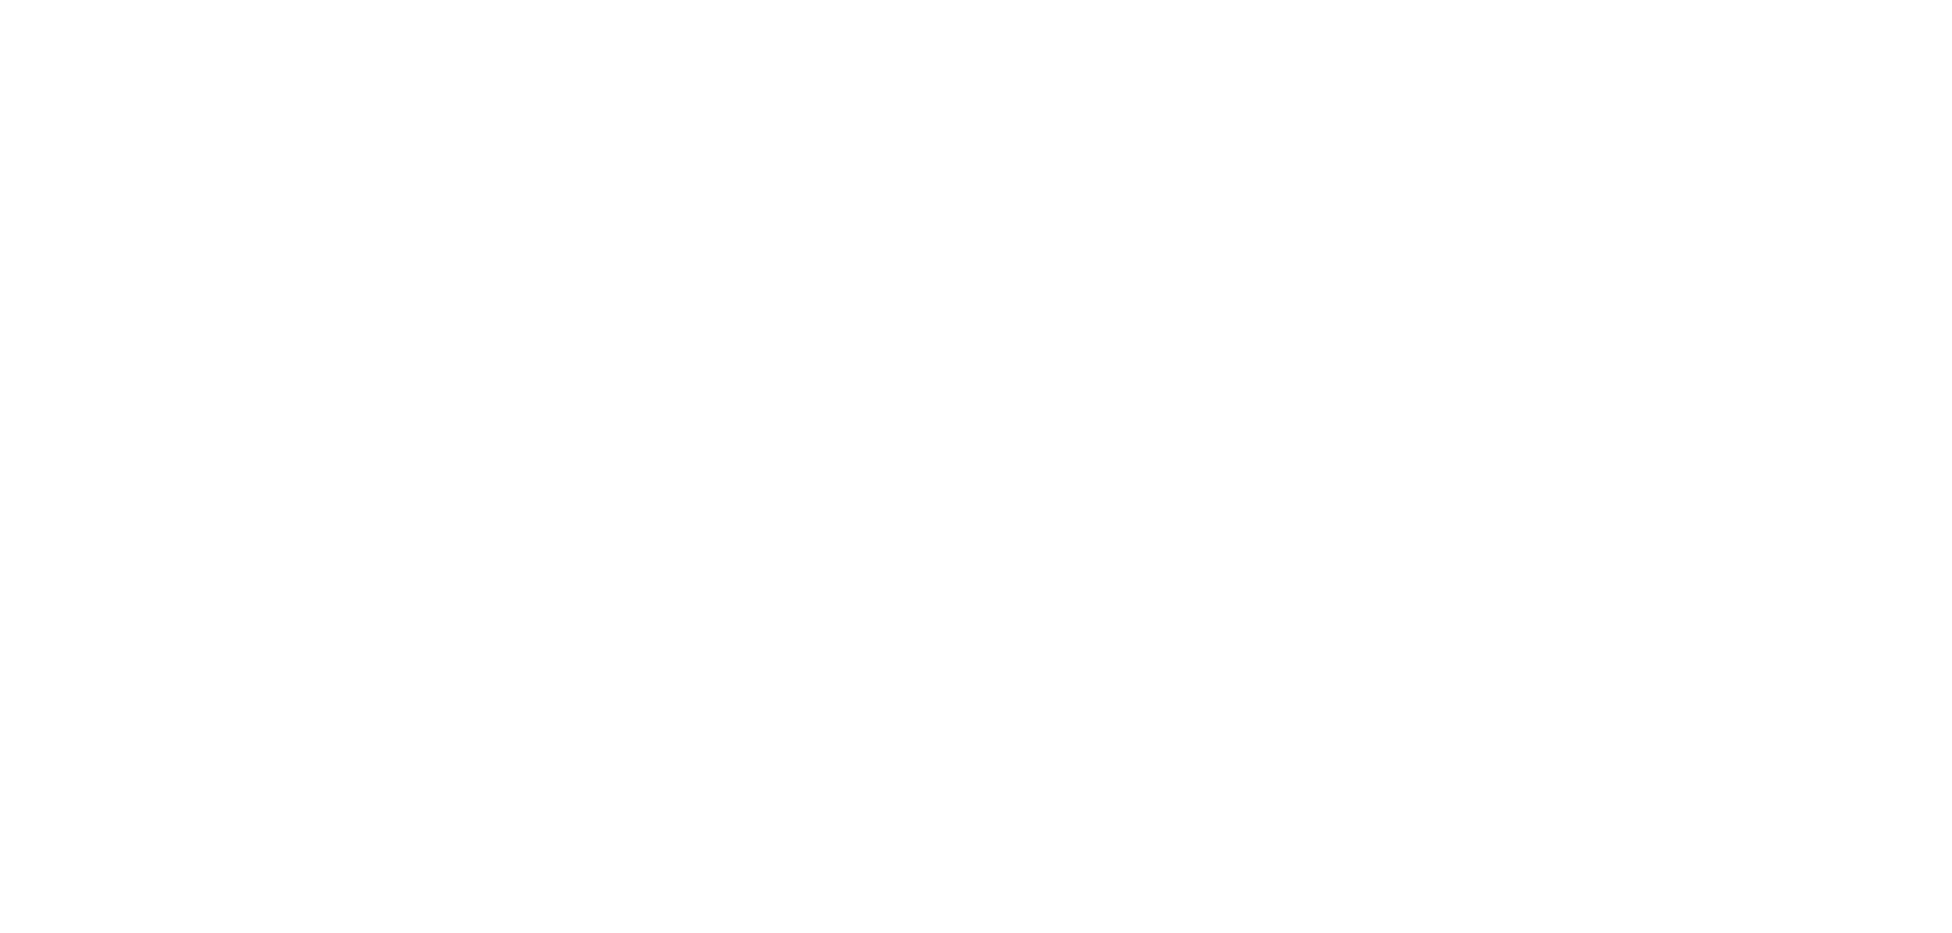 Tax at the speed of tech podcast logo